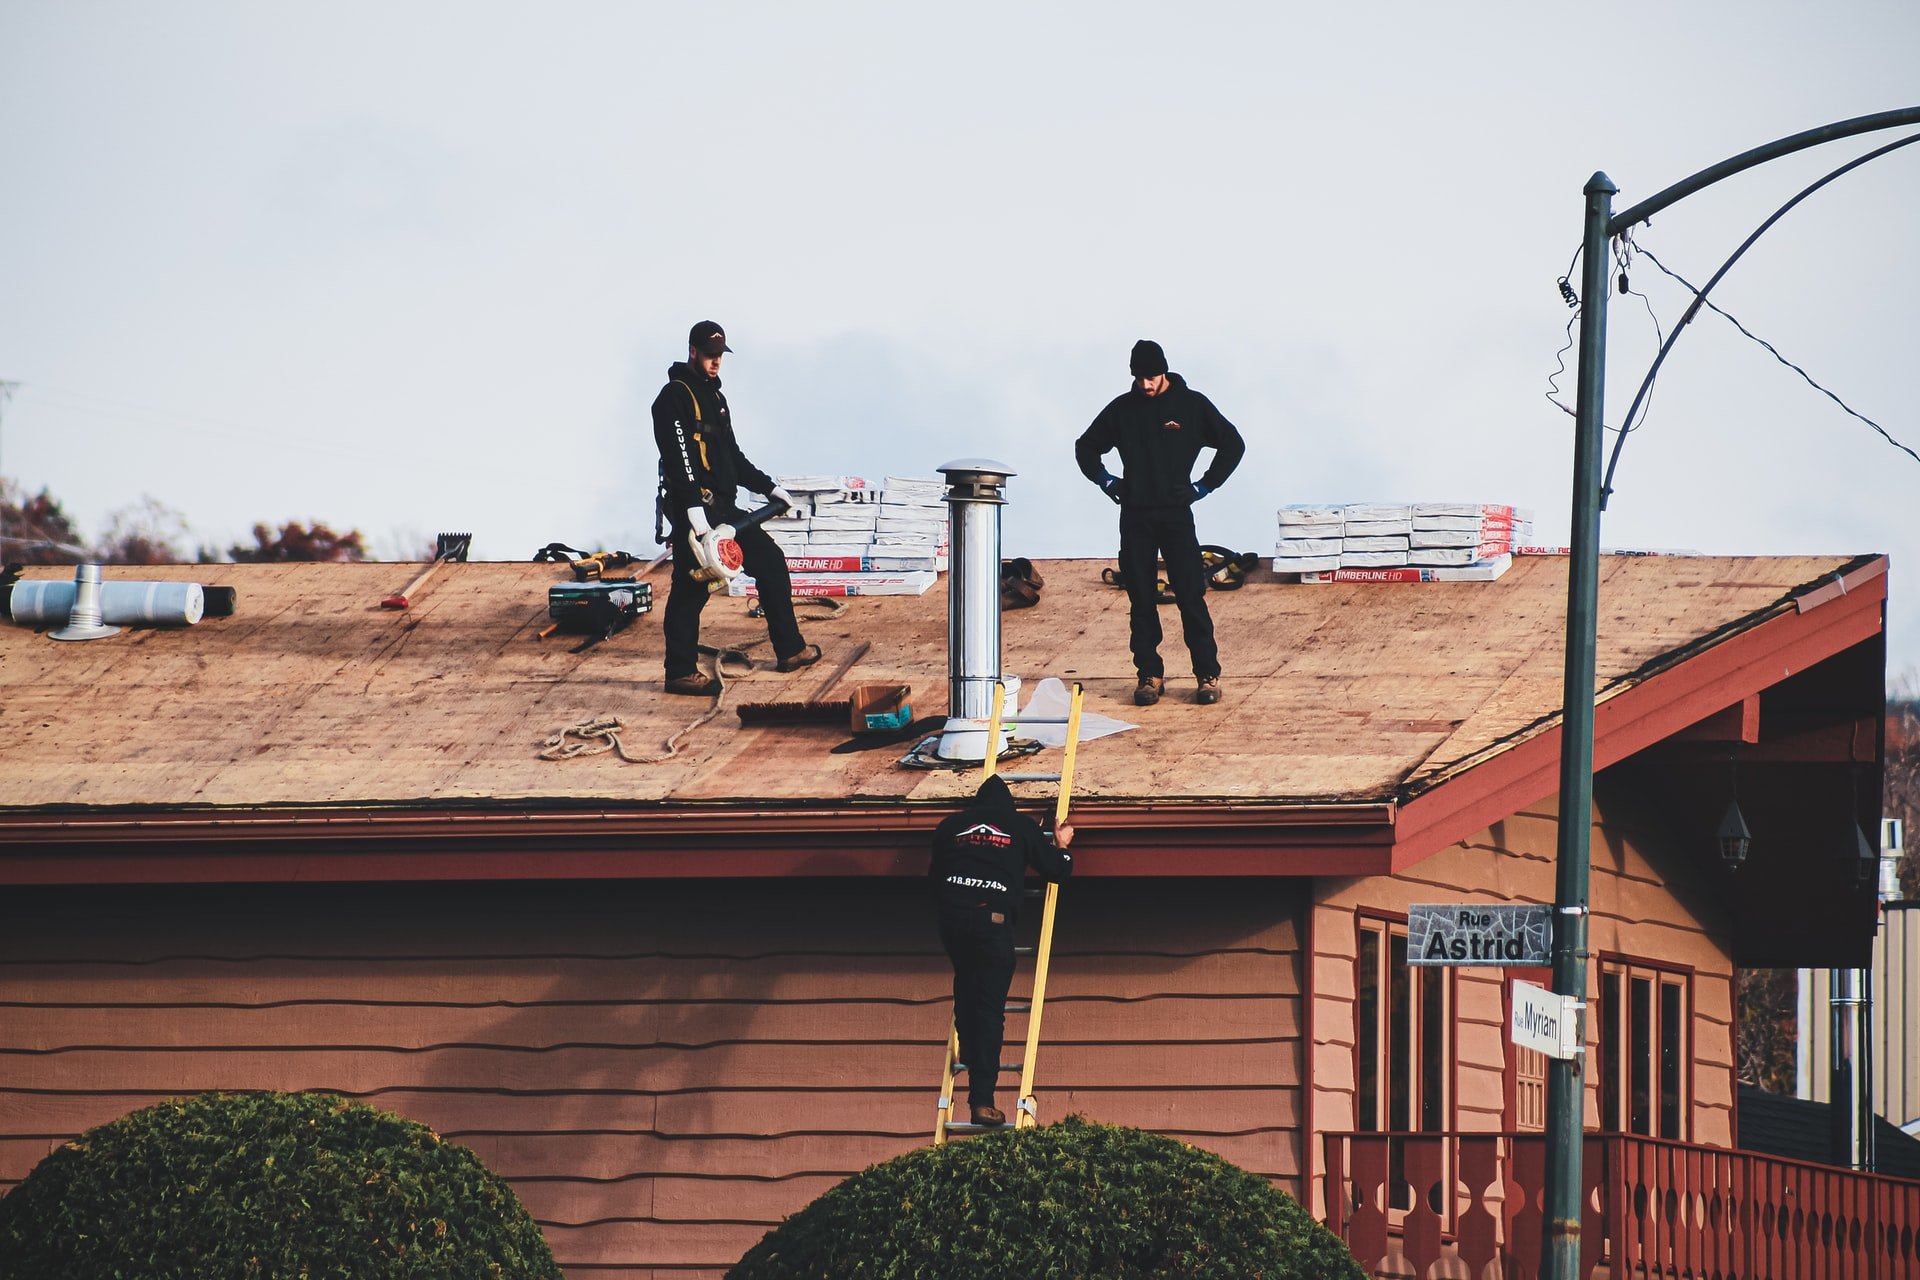 He repaired the roof with his team. | Source: Unsplash